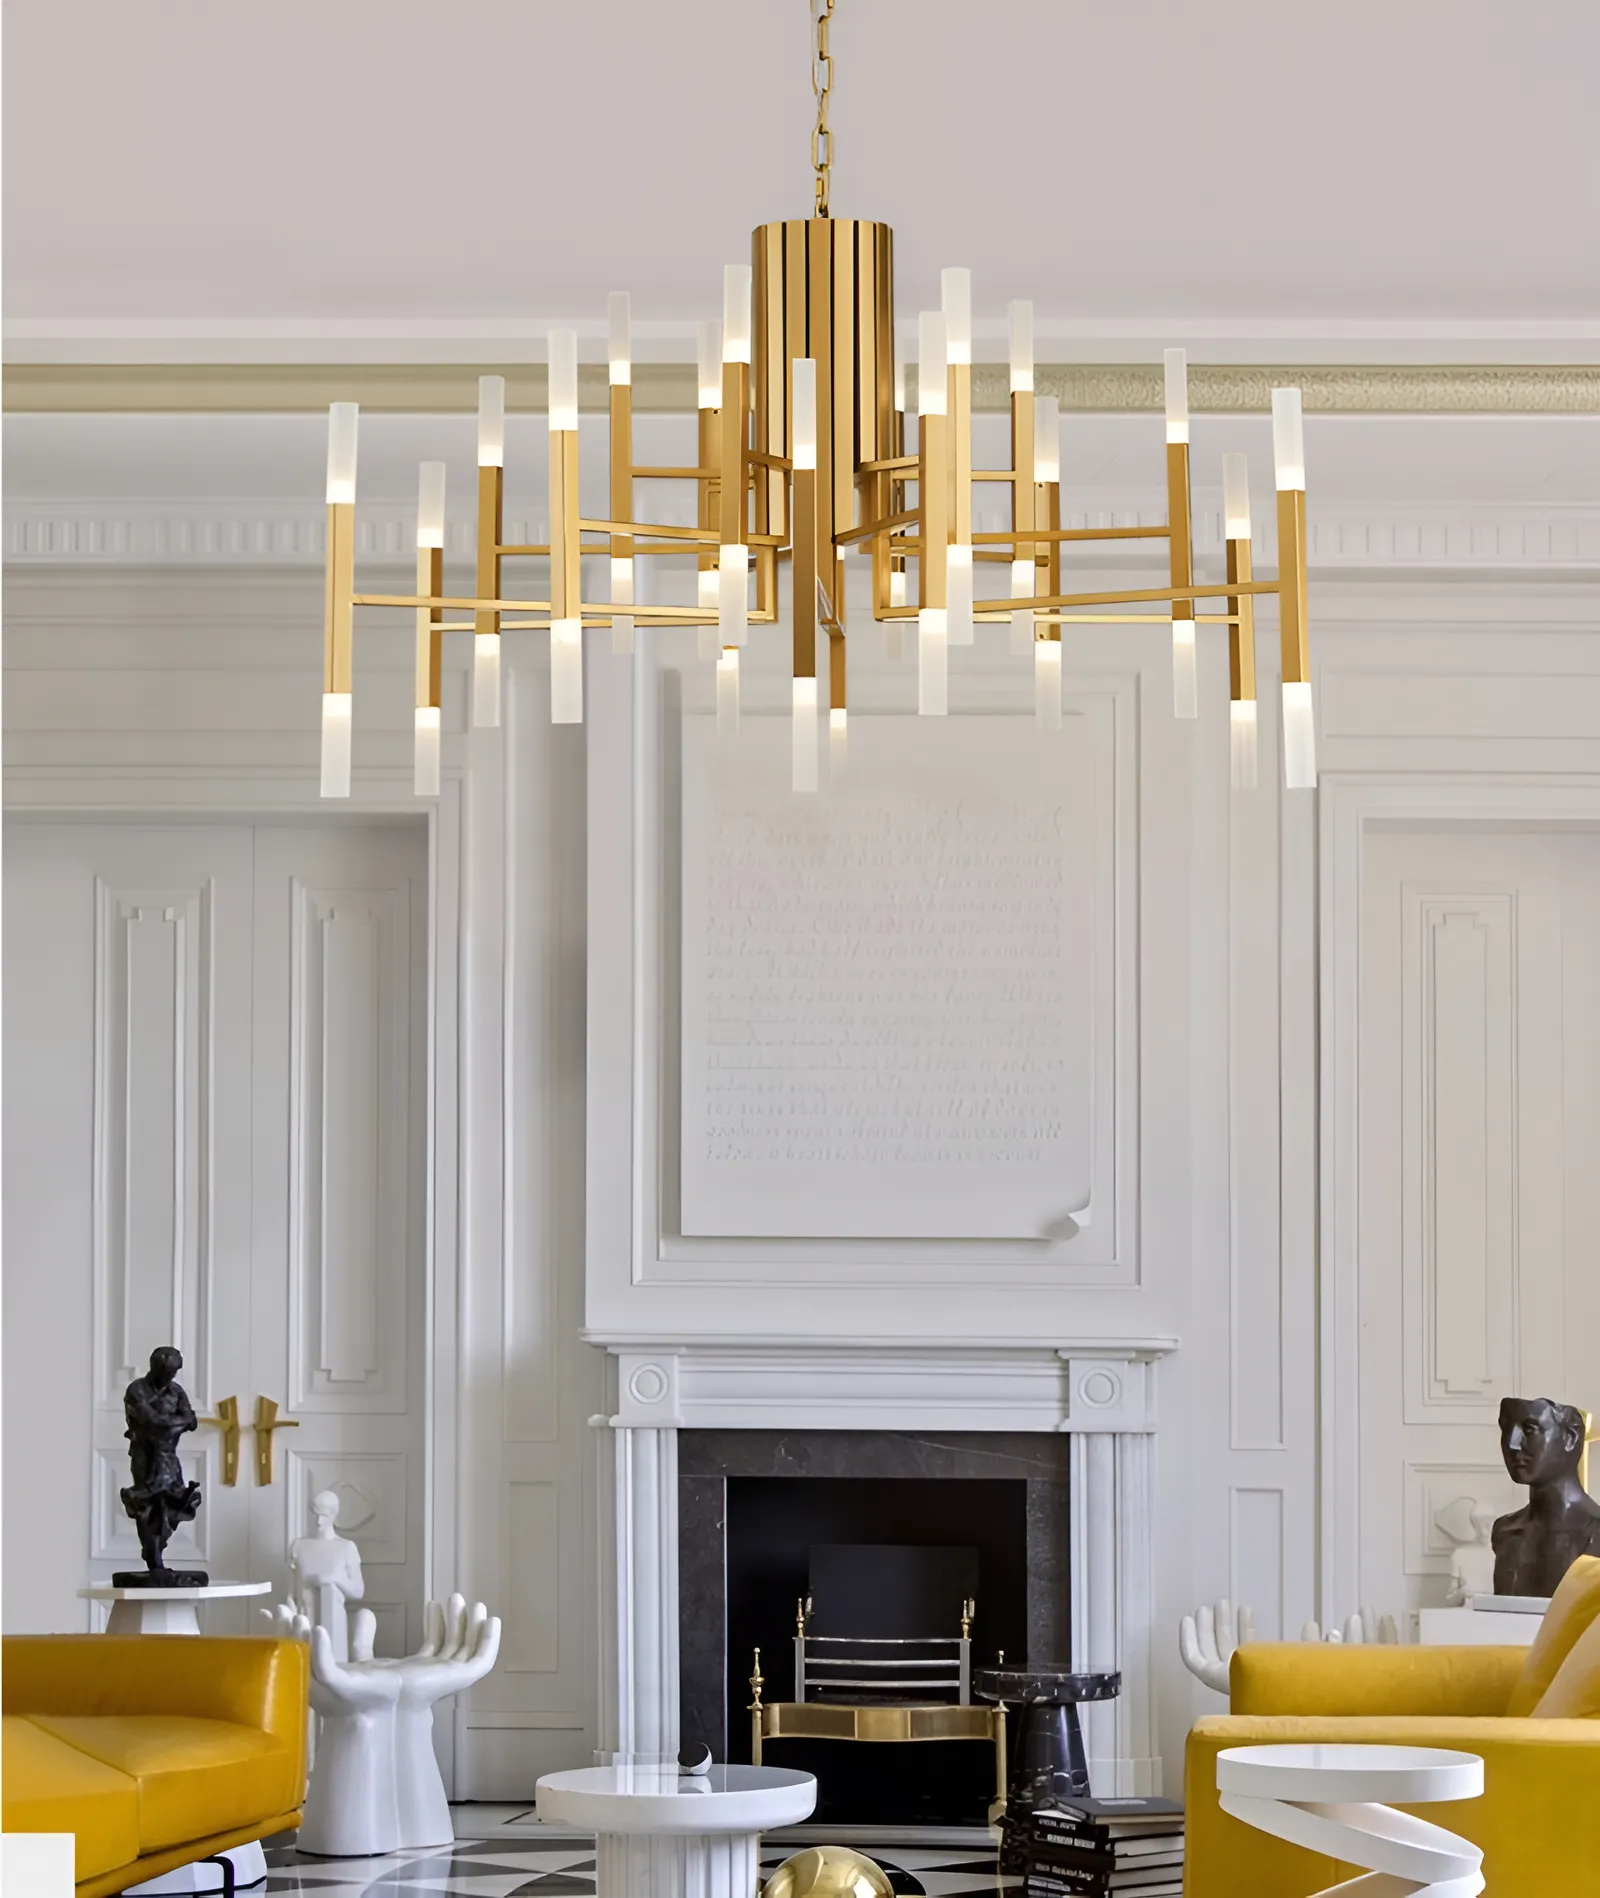 Chandeliers Latest Trends Discover the Newest Styles and Designs in Chandeliers for Your Home